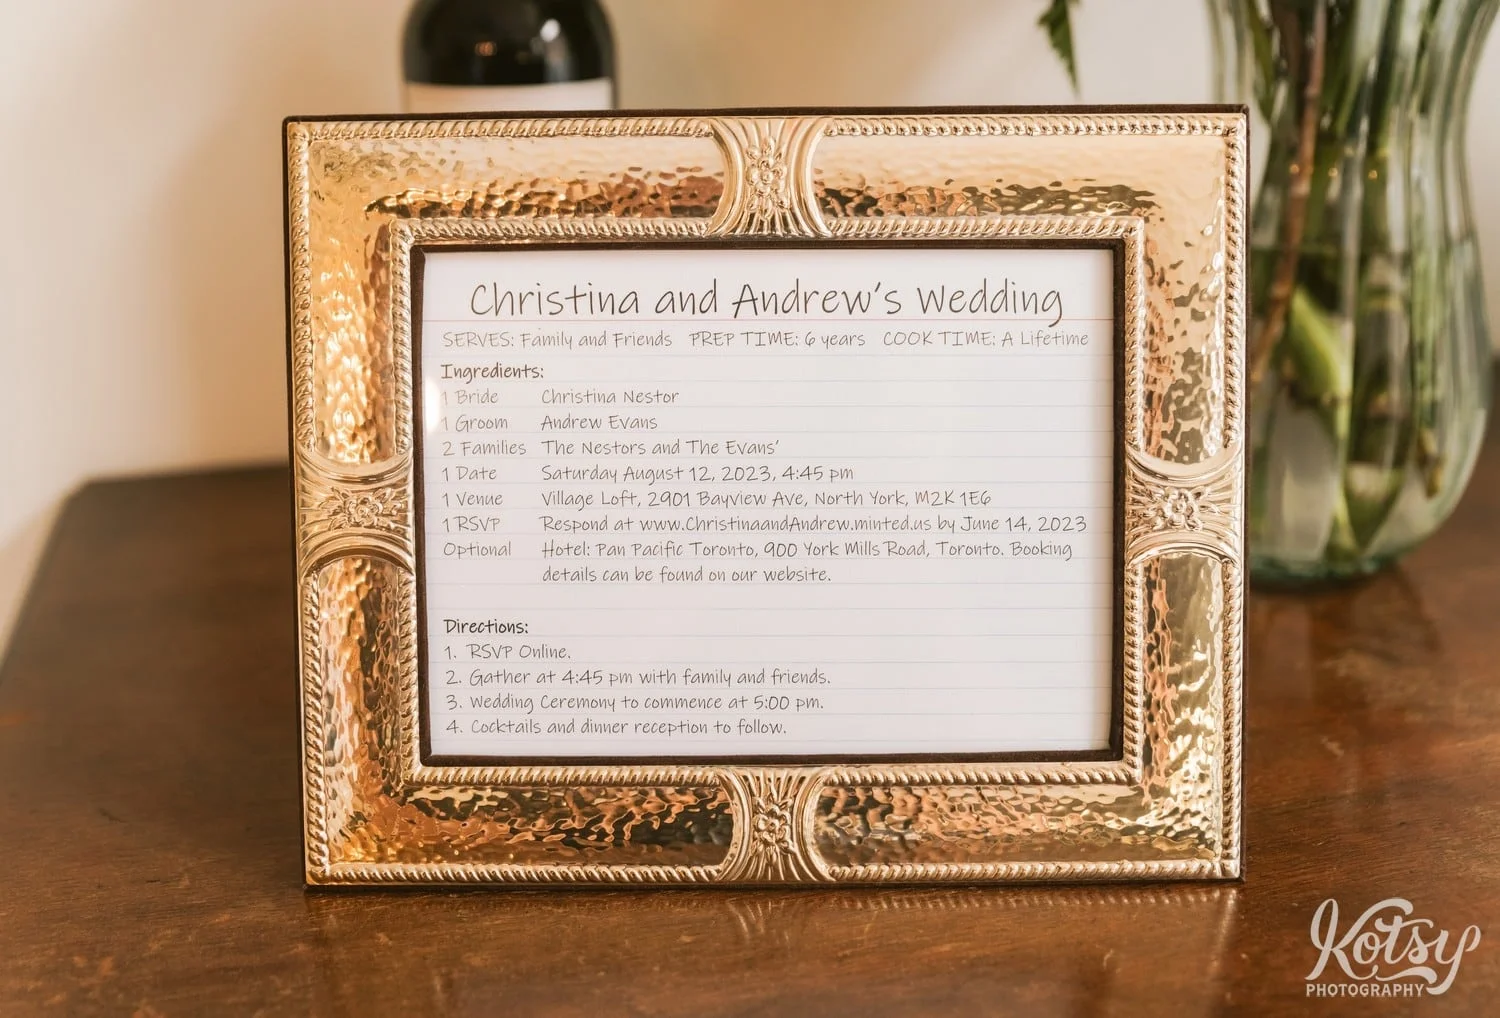 A framed invite for a wedding that is presented like a cooking recipe